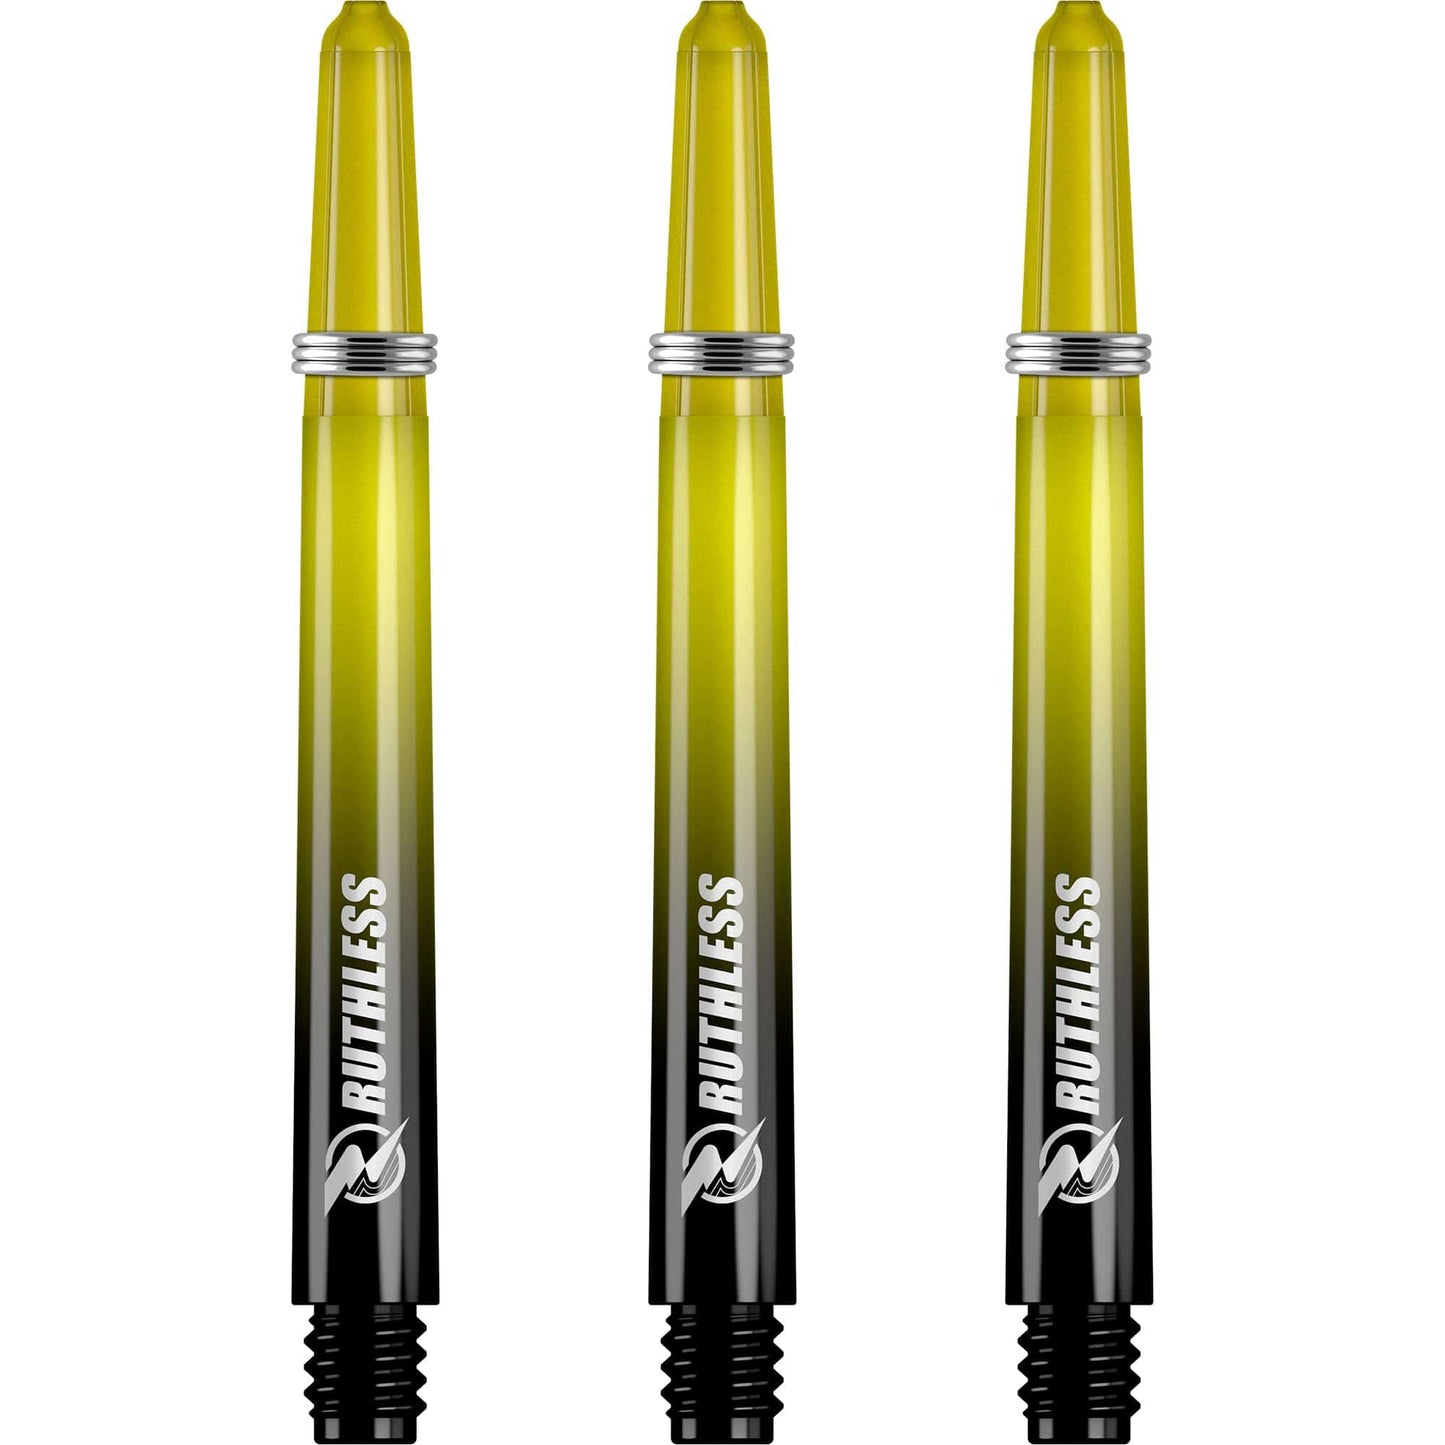 Ruthless Deflectagrip Plus Dart Shafts - Polycarbonate Stems with Springs - Yellow Medium